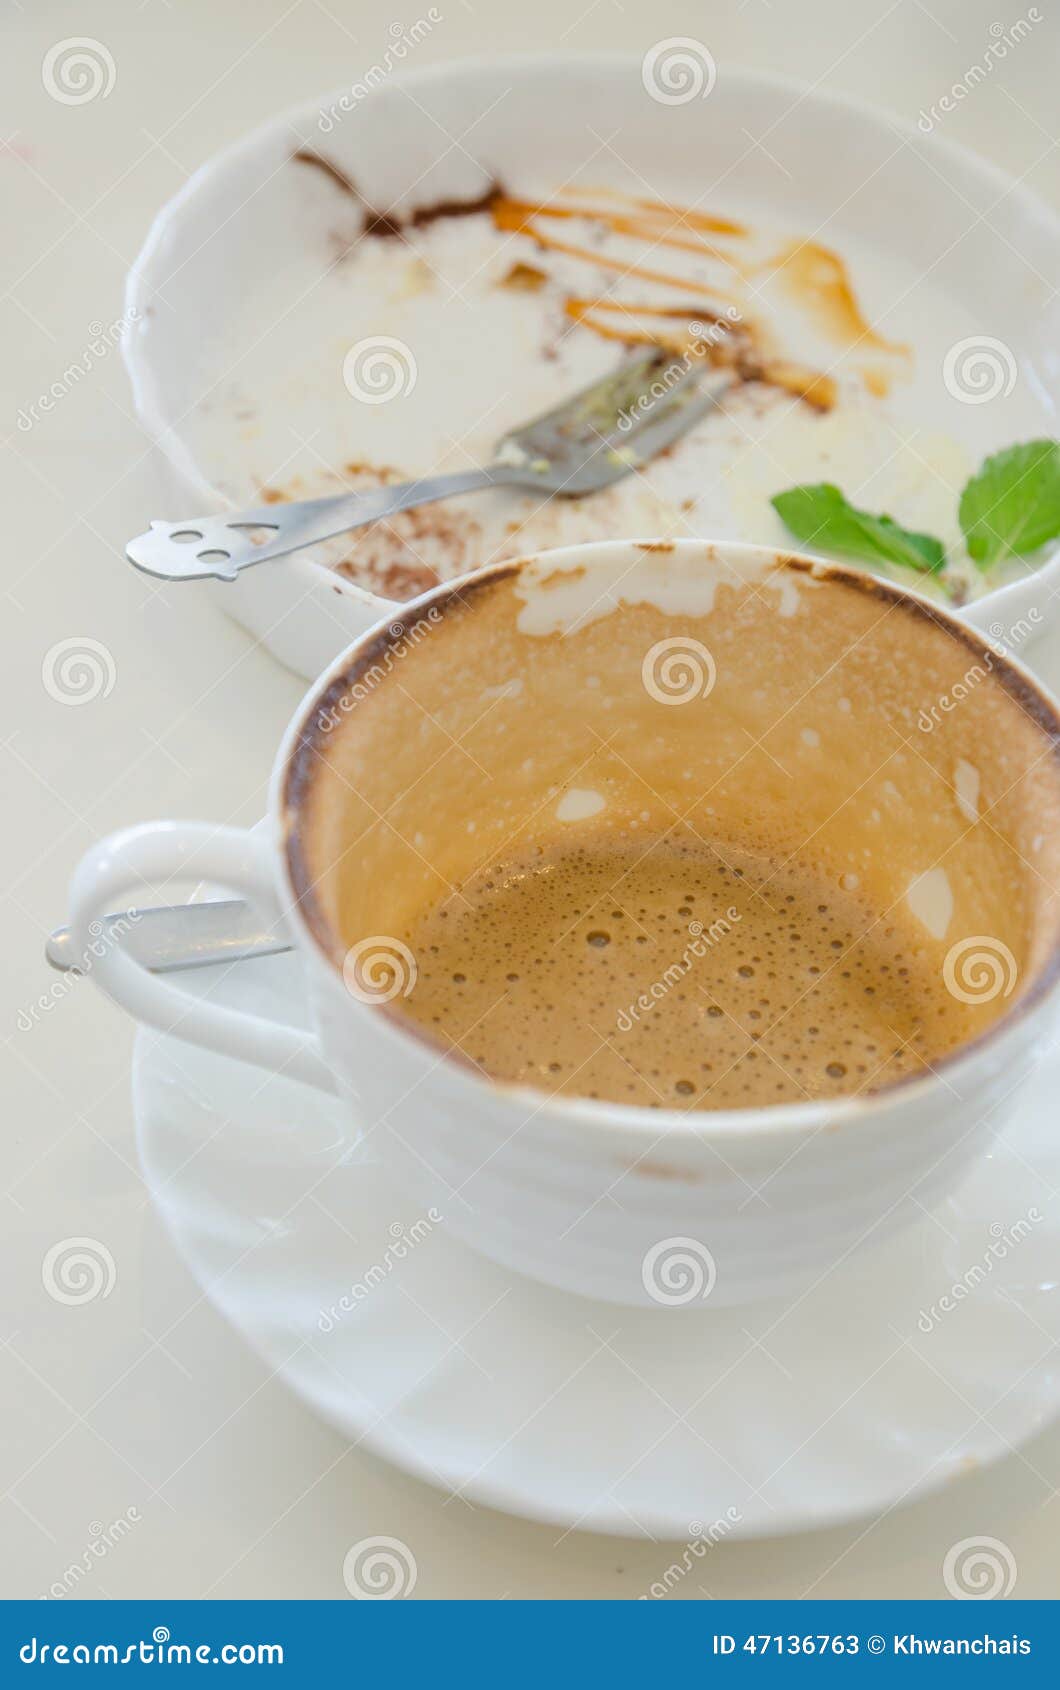 Empty Coffee Cup and Empty Dish Stock Image - Image of empty, cafe ...